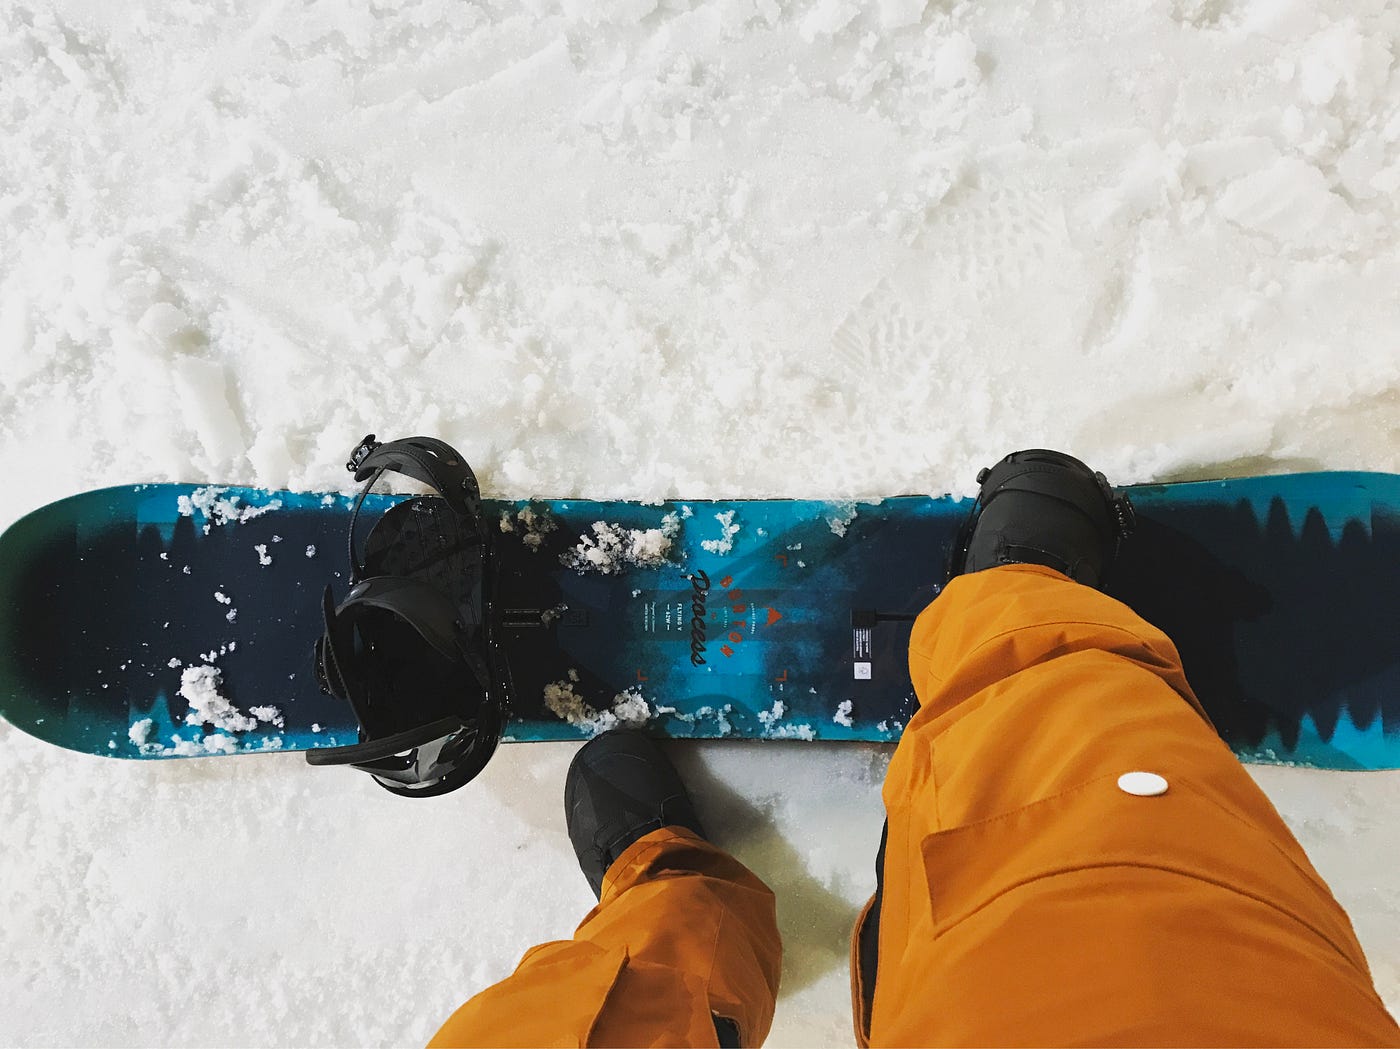 Snowboarding after a rainy day. Last night was supposed to be just… | by  João R.G. Sampaio | Riding Diaries | Medium